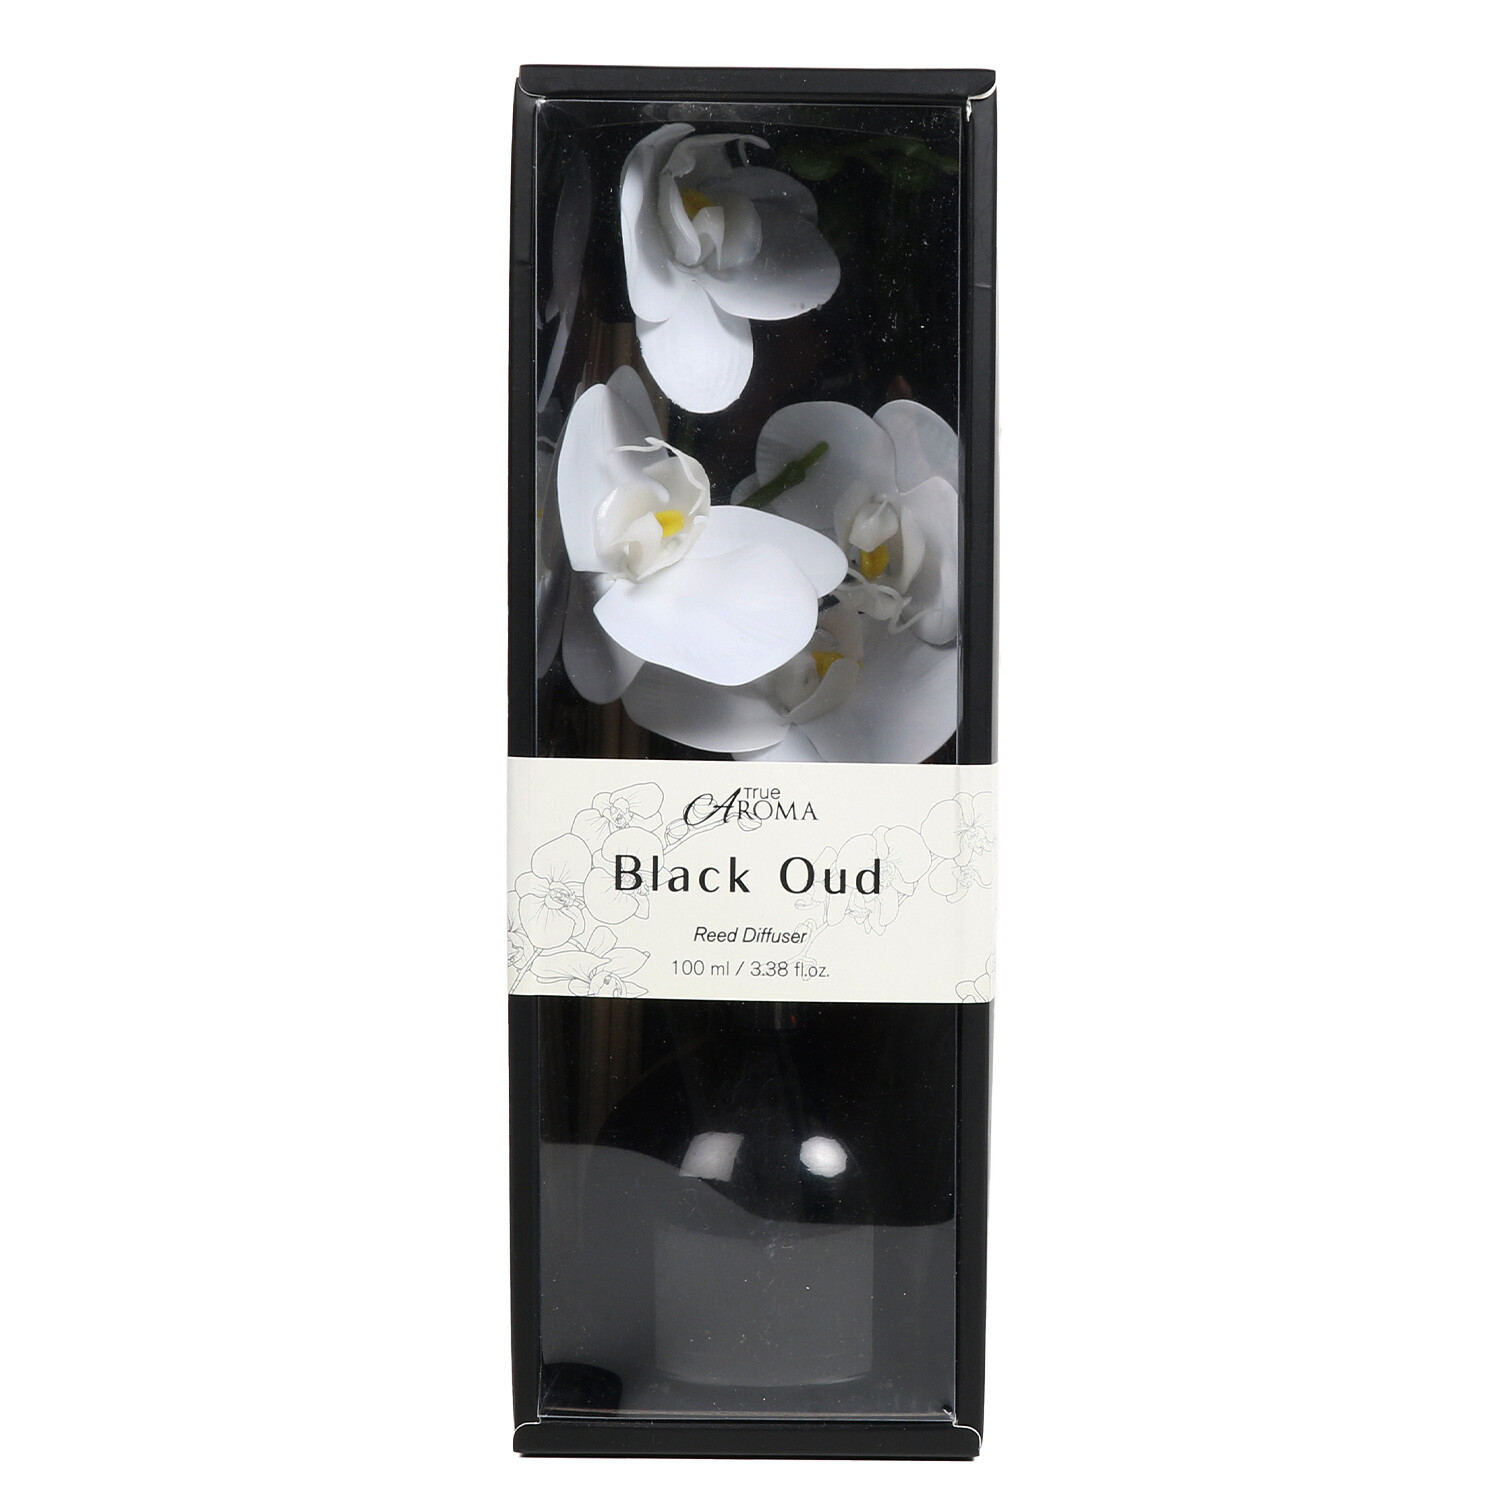 True Aroma Black Oud Orchid Reed Diffuser 150ml Image 2